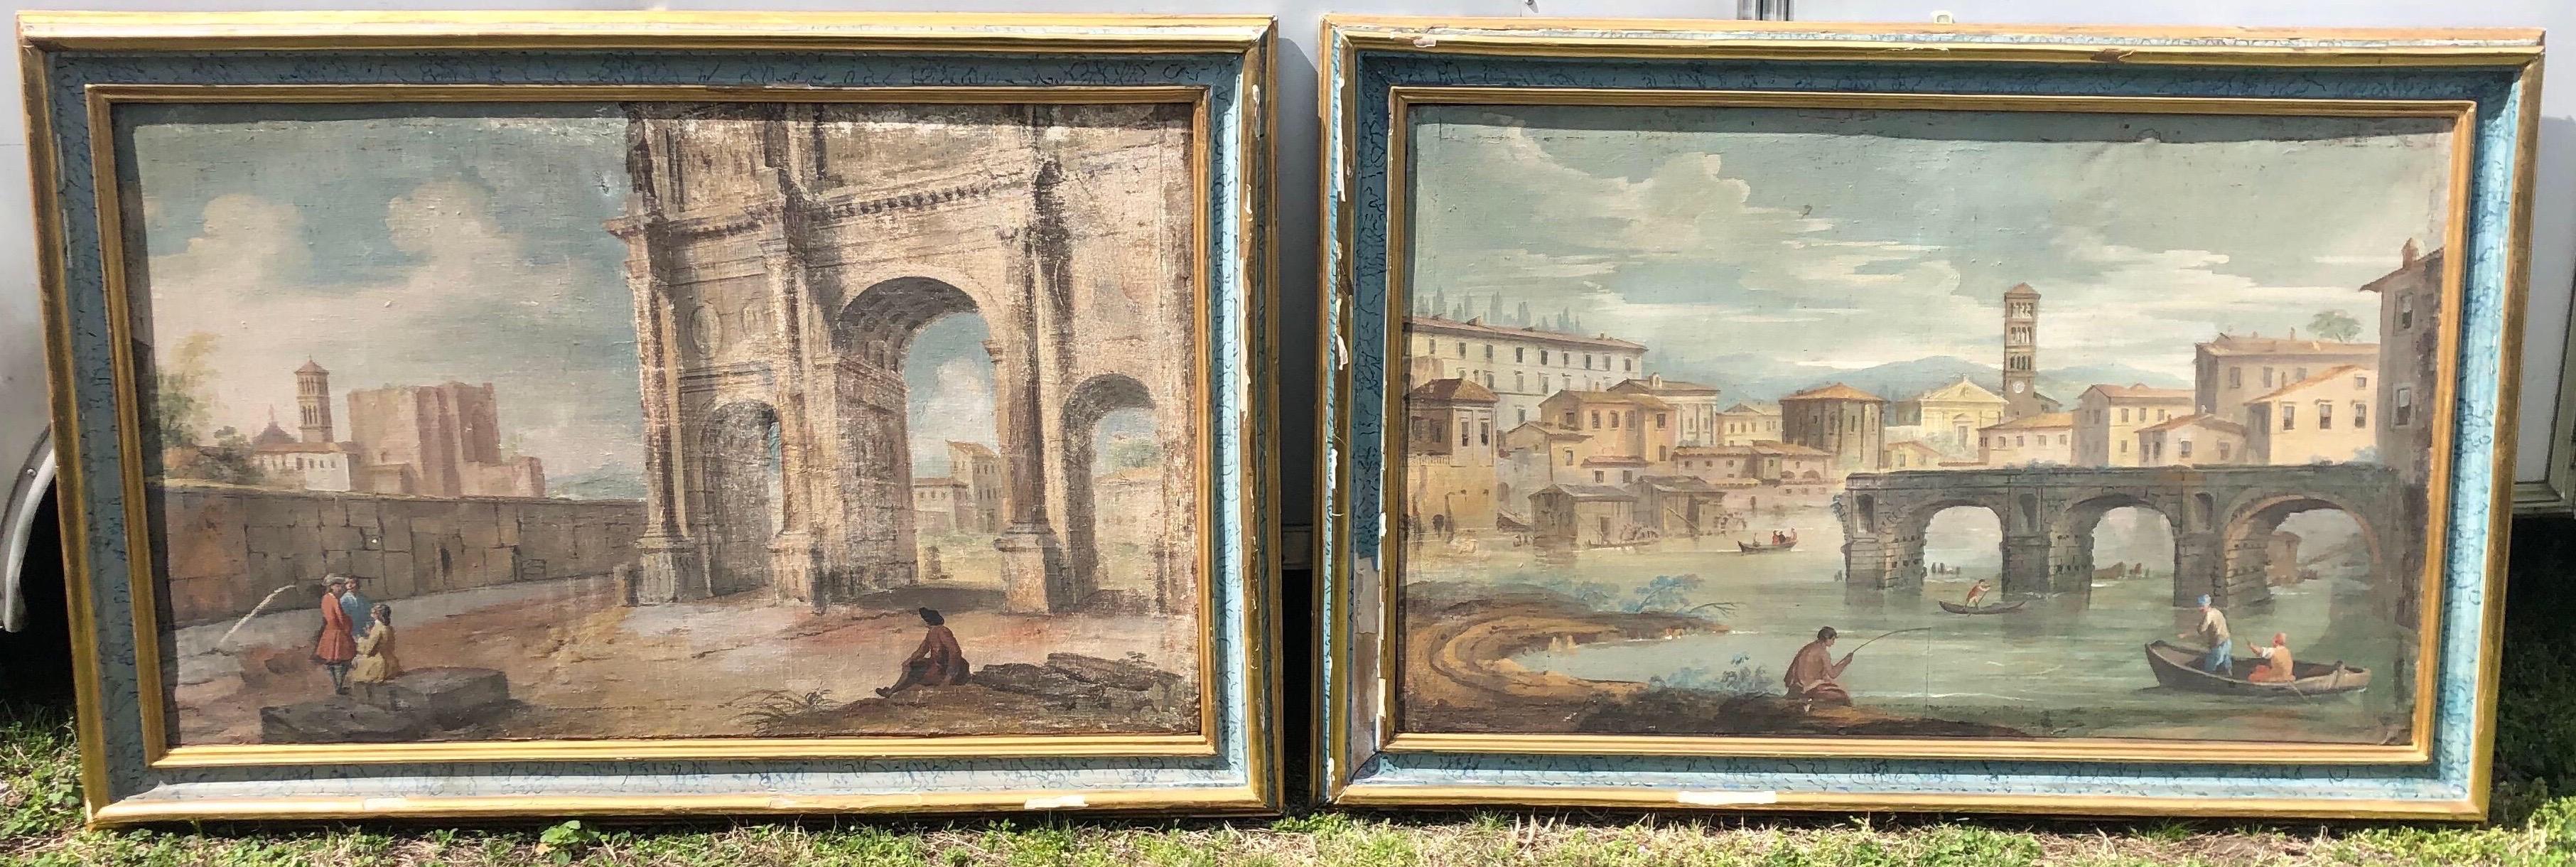 Incredible pair of larger scale 18th-early 19th century Italian paintings of city scenes on hand woven linen. Frames are possibly original to paintings. 

Frames measure 66.5